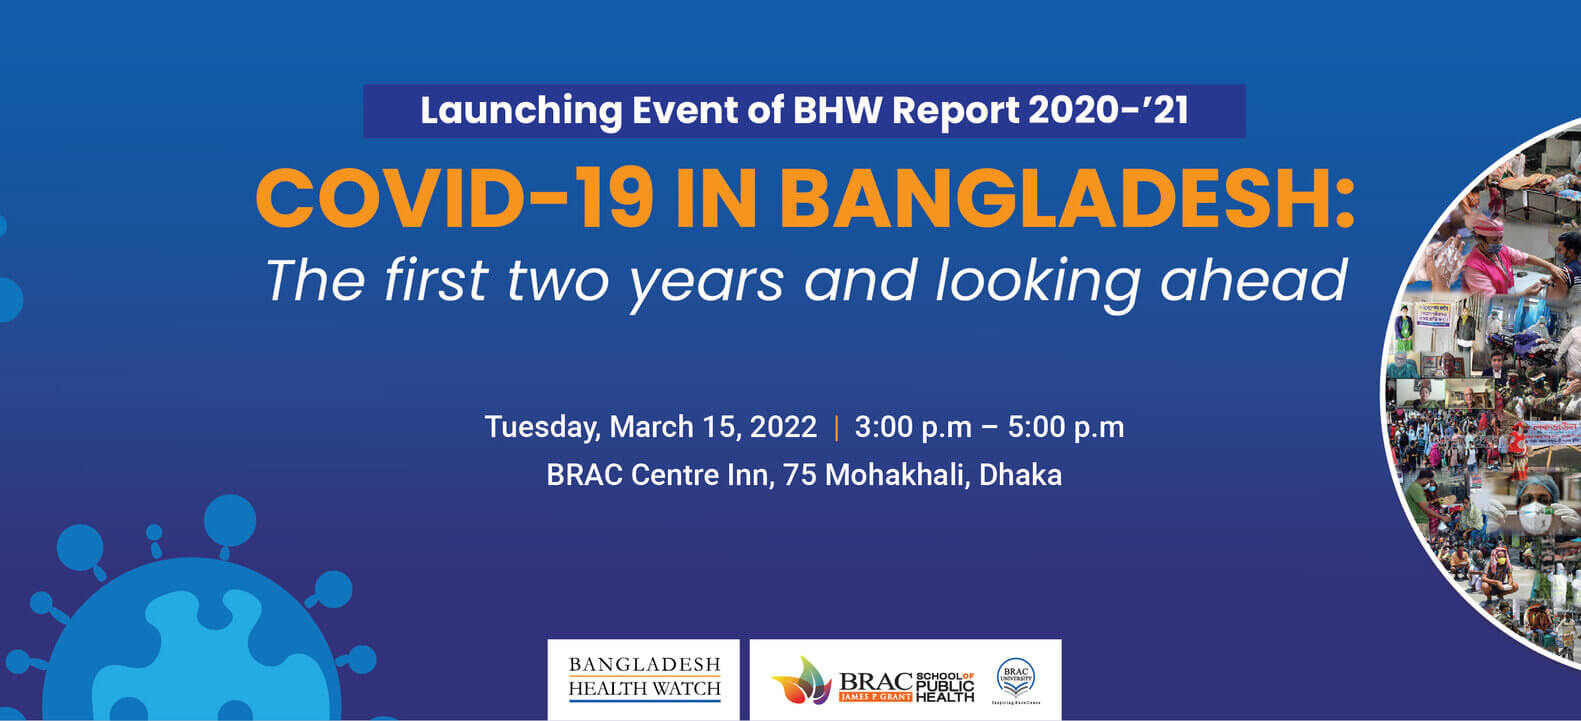 BHW Report 2020-21 Launching